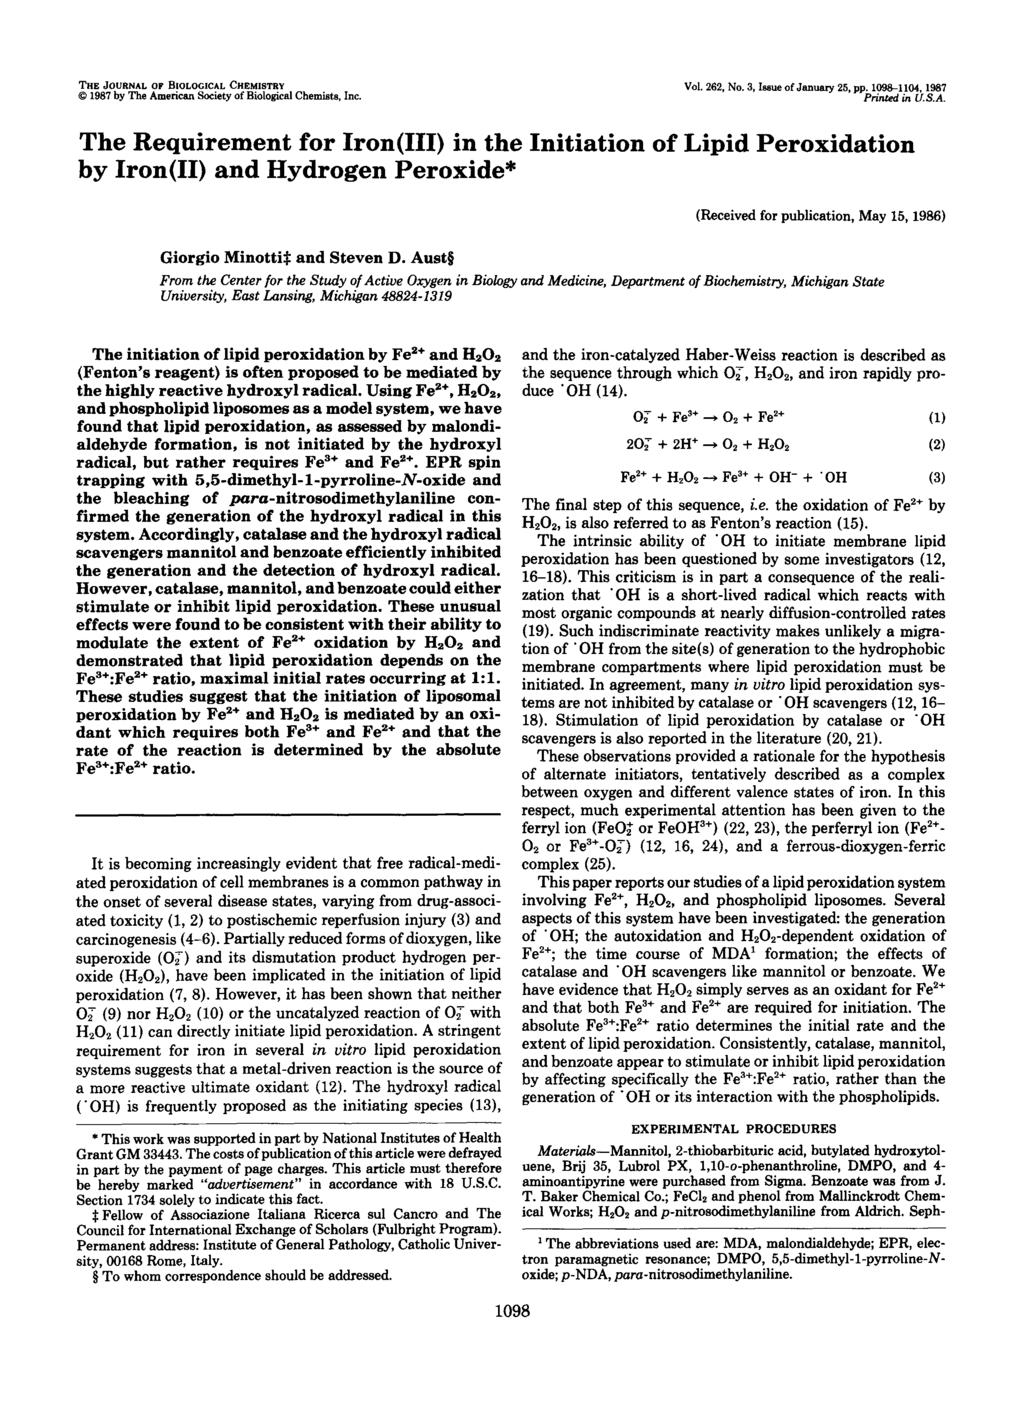 THE JOURNAL OF BIOLOGICAL CHEMISTRY Q 1987 by The American Society of Biological Chemists, Inc. Vol. 262, No. 3, Isaue of January 25, pp. lg9&1104,1987 Prinred in U.S.A. The Requirement for Iron(II1) in the Initiation of Lipid Peroxidation by Iron(I1) and Hydrogen Peroxide* (Received for publication, May 15, 1986) Giorgio Minotti# and Steven D.